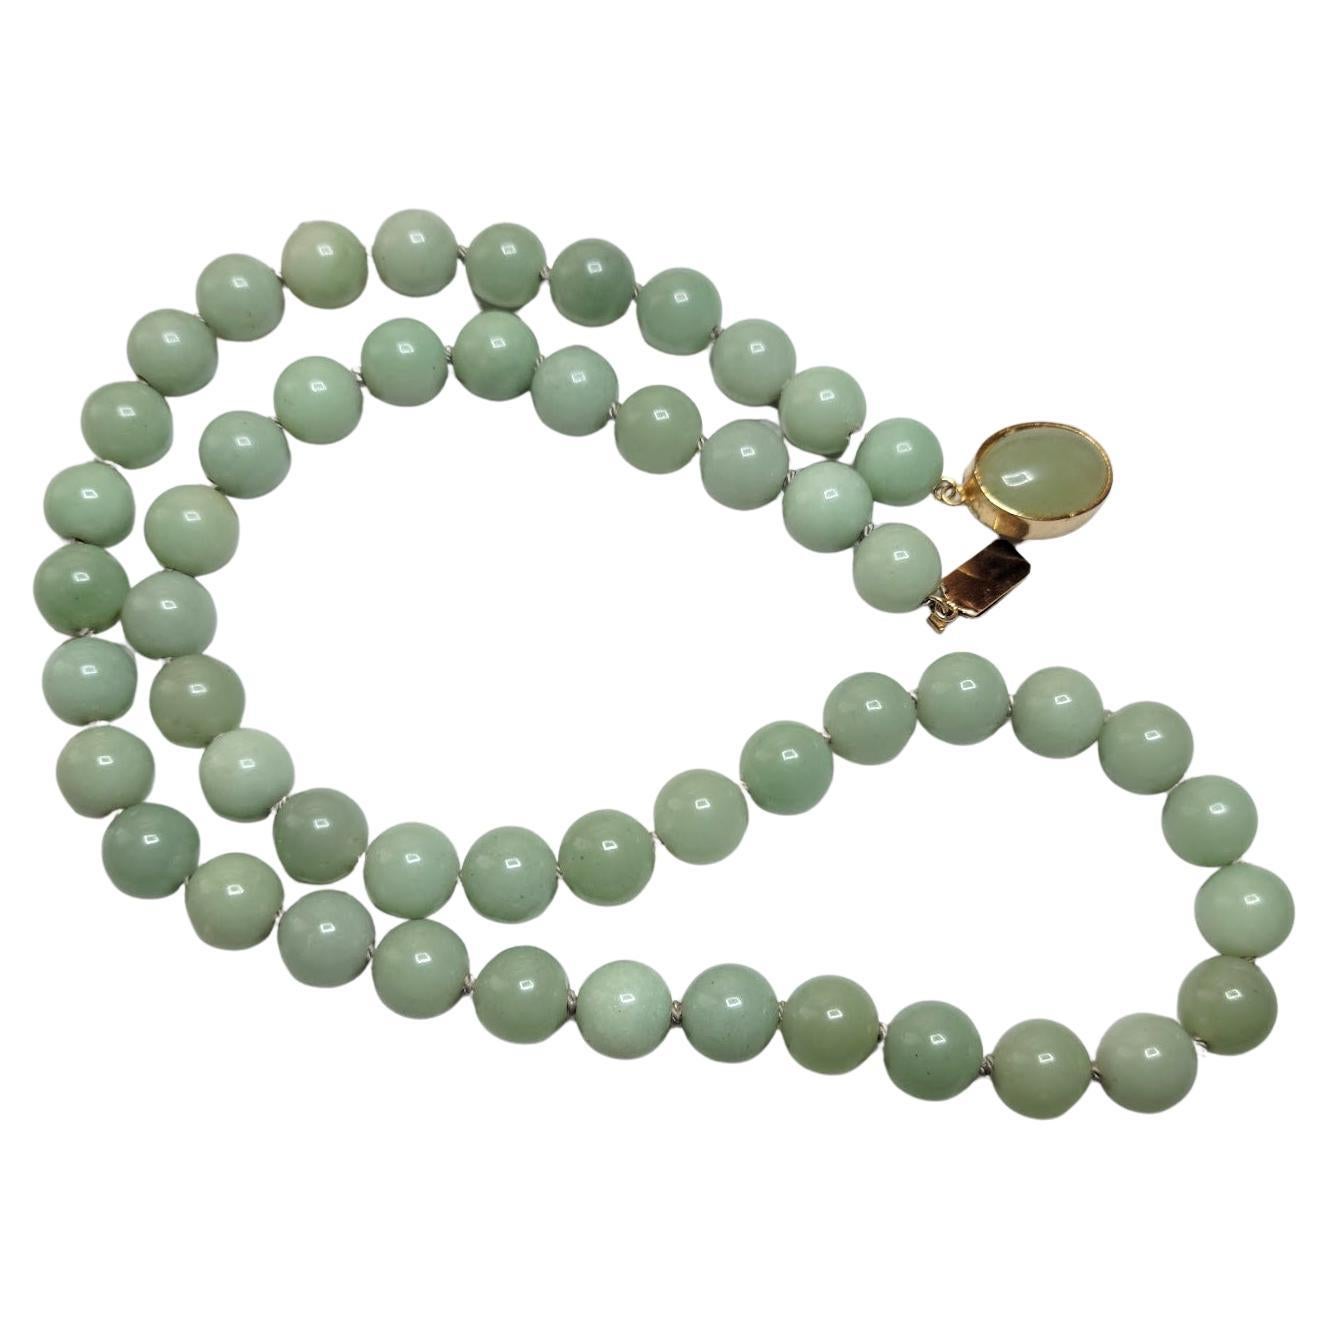 New Zealand Green Jade Nephrite Necklace For Sale